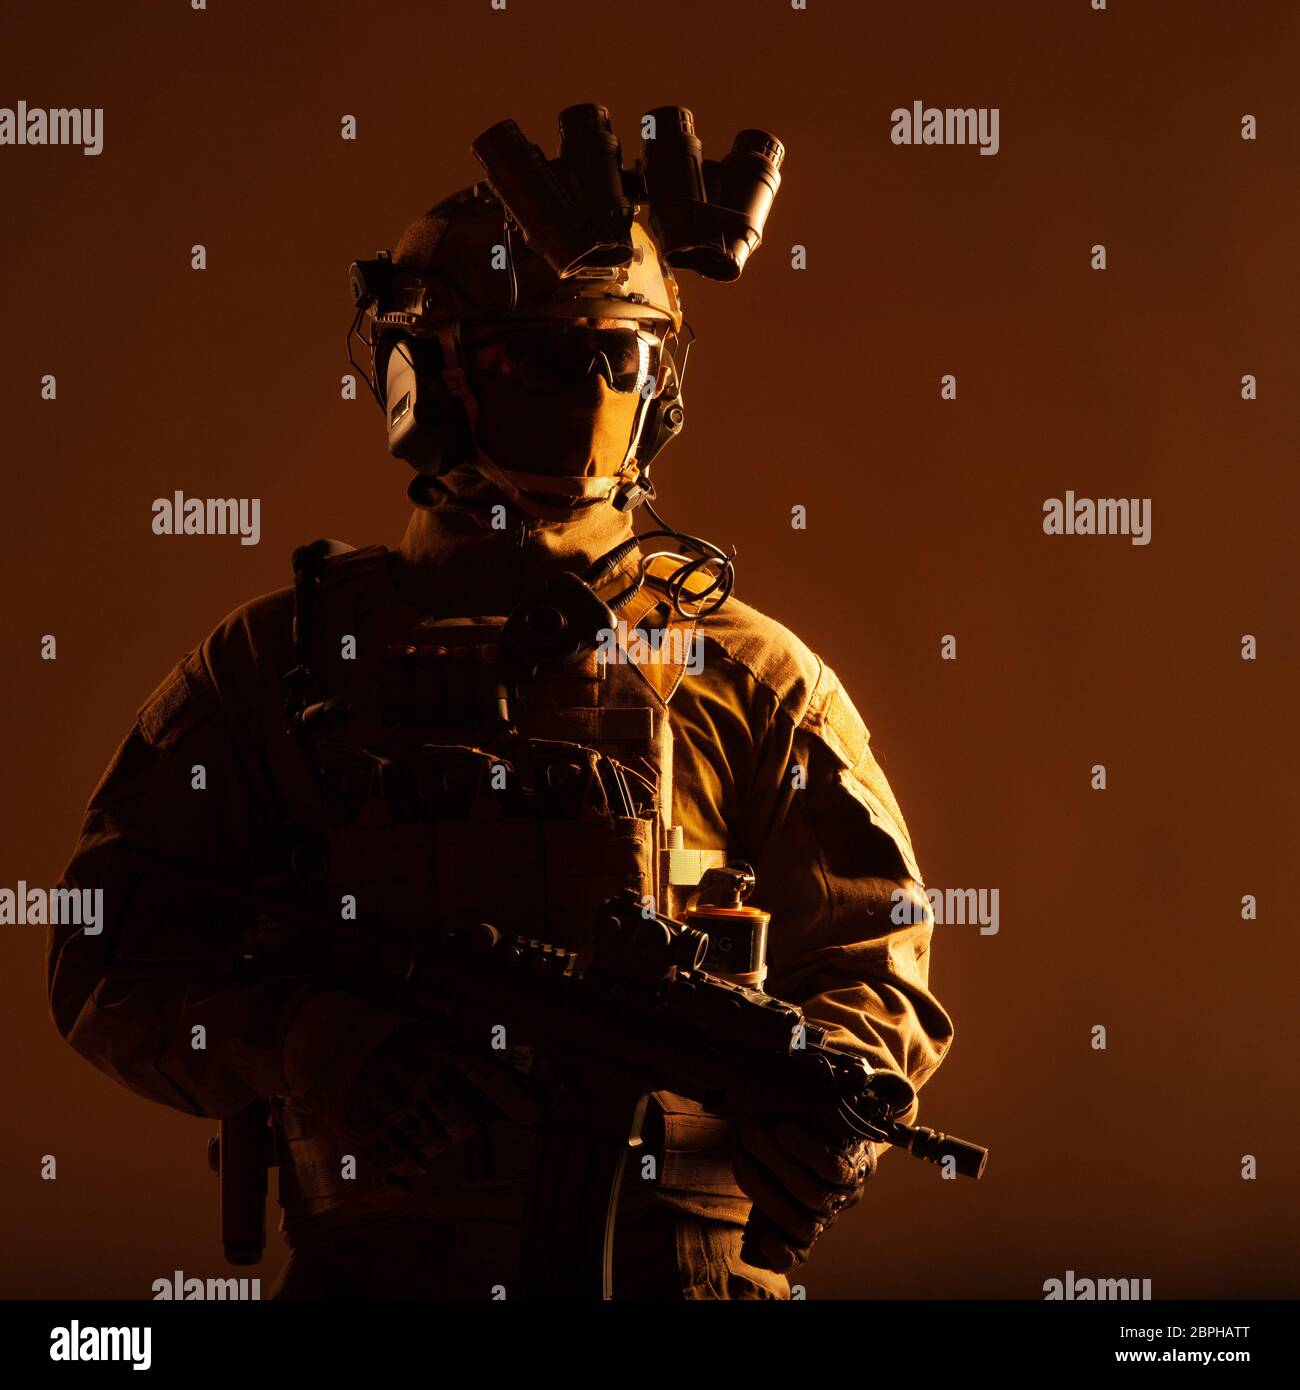 Army elite forces member, modern infantryman with hidden face, in tactical ammunition, equipped radio headset, night vision device mounted on helmet, Stock Photo